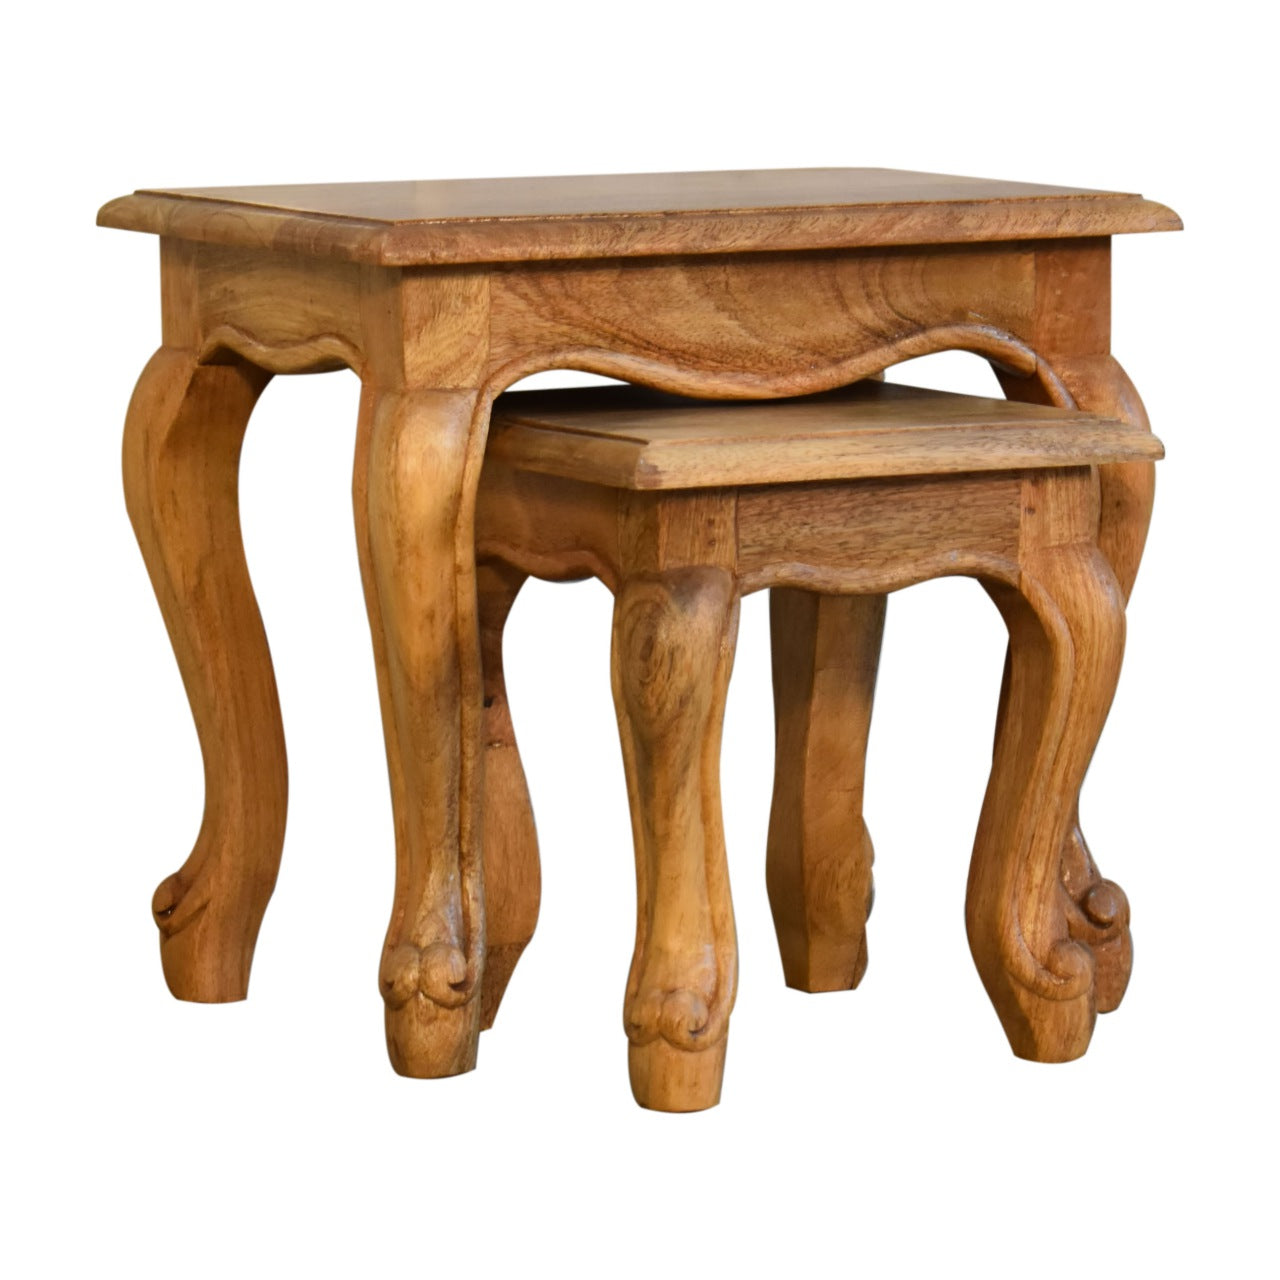 Oak-ish French Style 2 Stool Set Two Small Solid Mang Wood Tables - CasaFenix